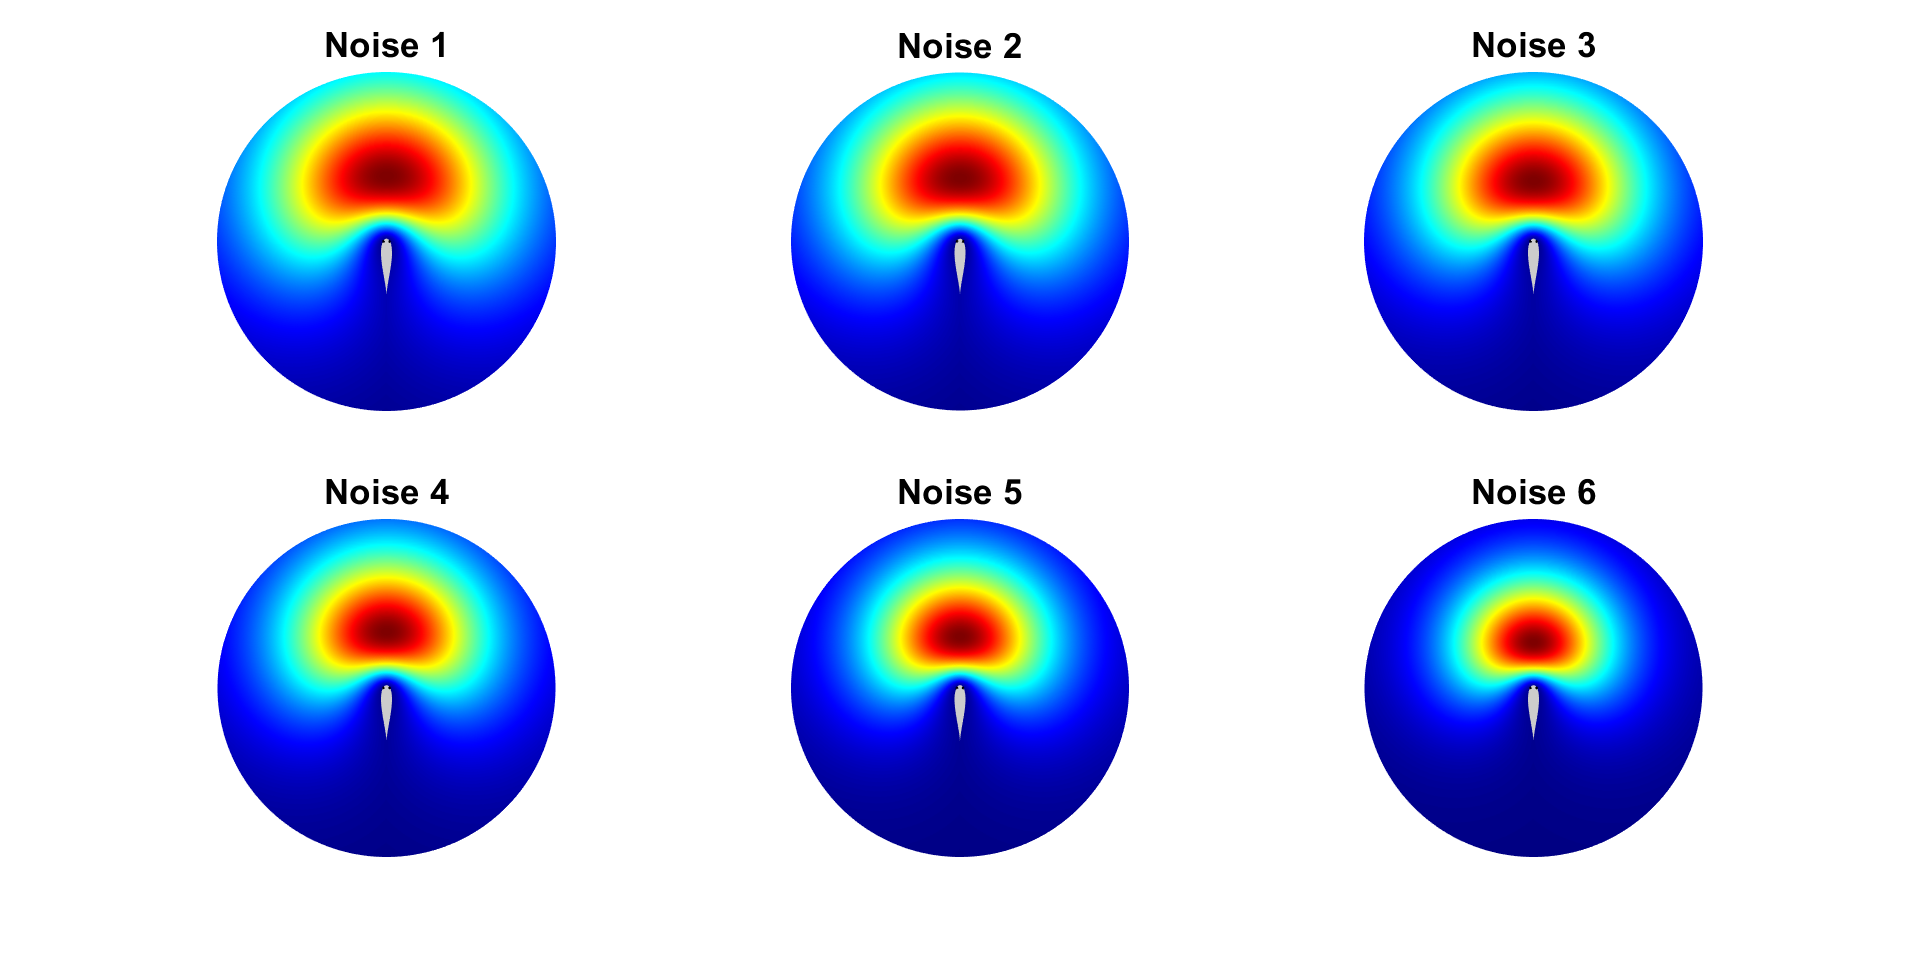 How the perception function is affected by increasing levels (1 to 6) of visual noise